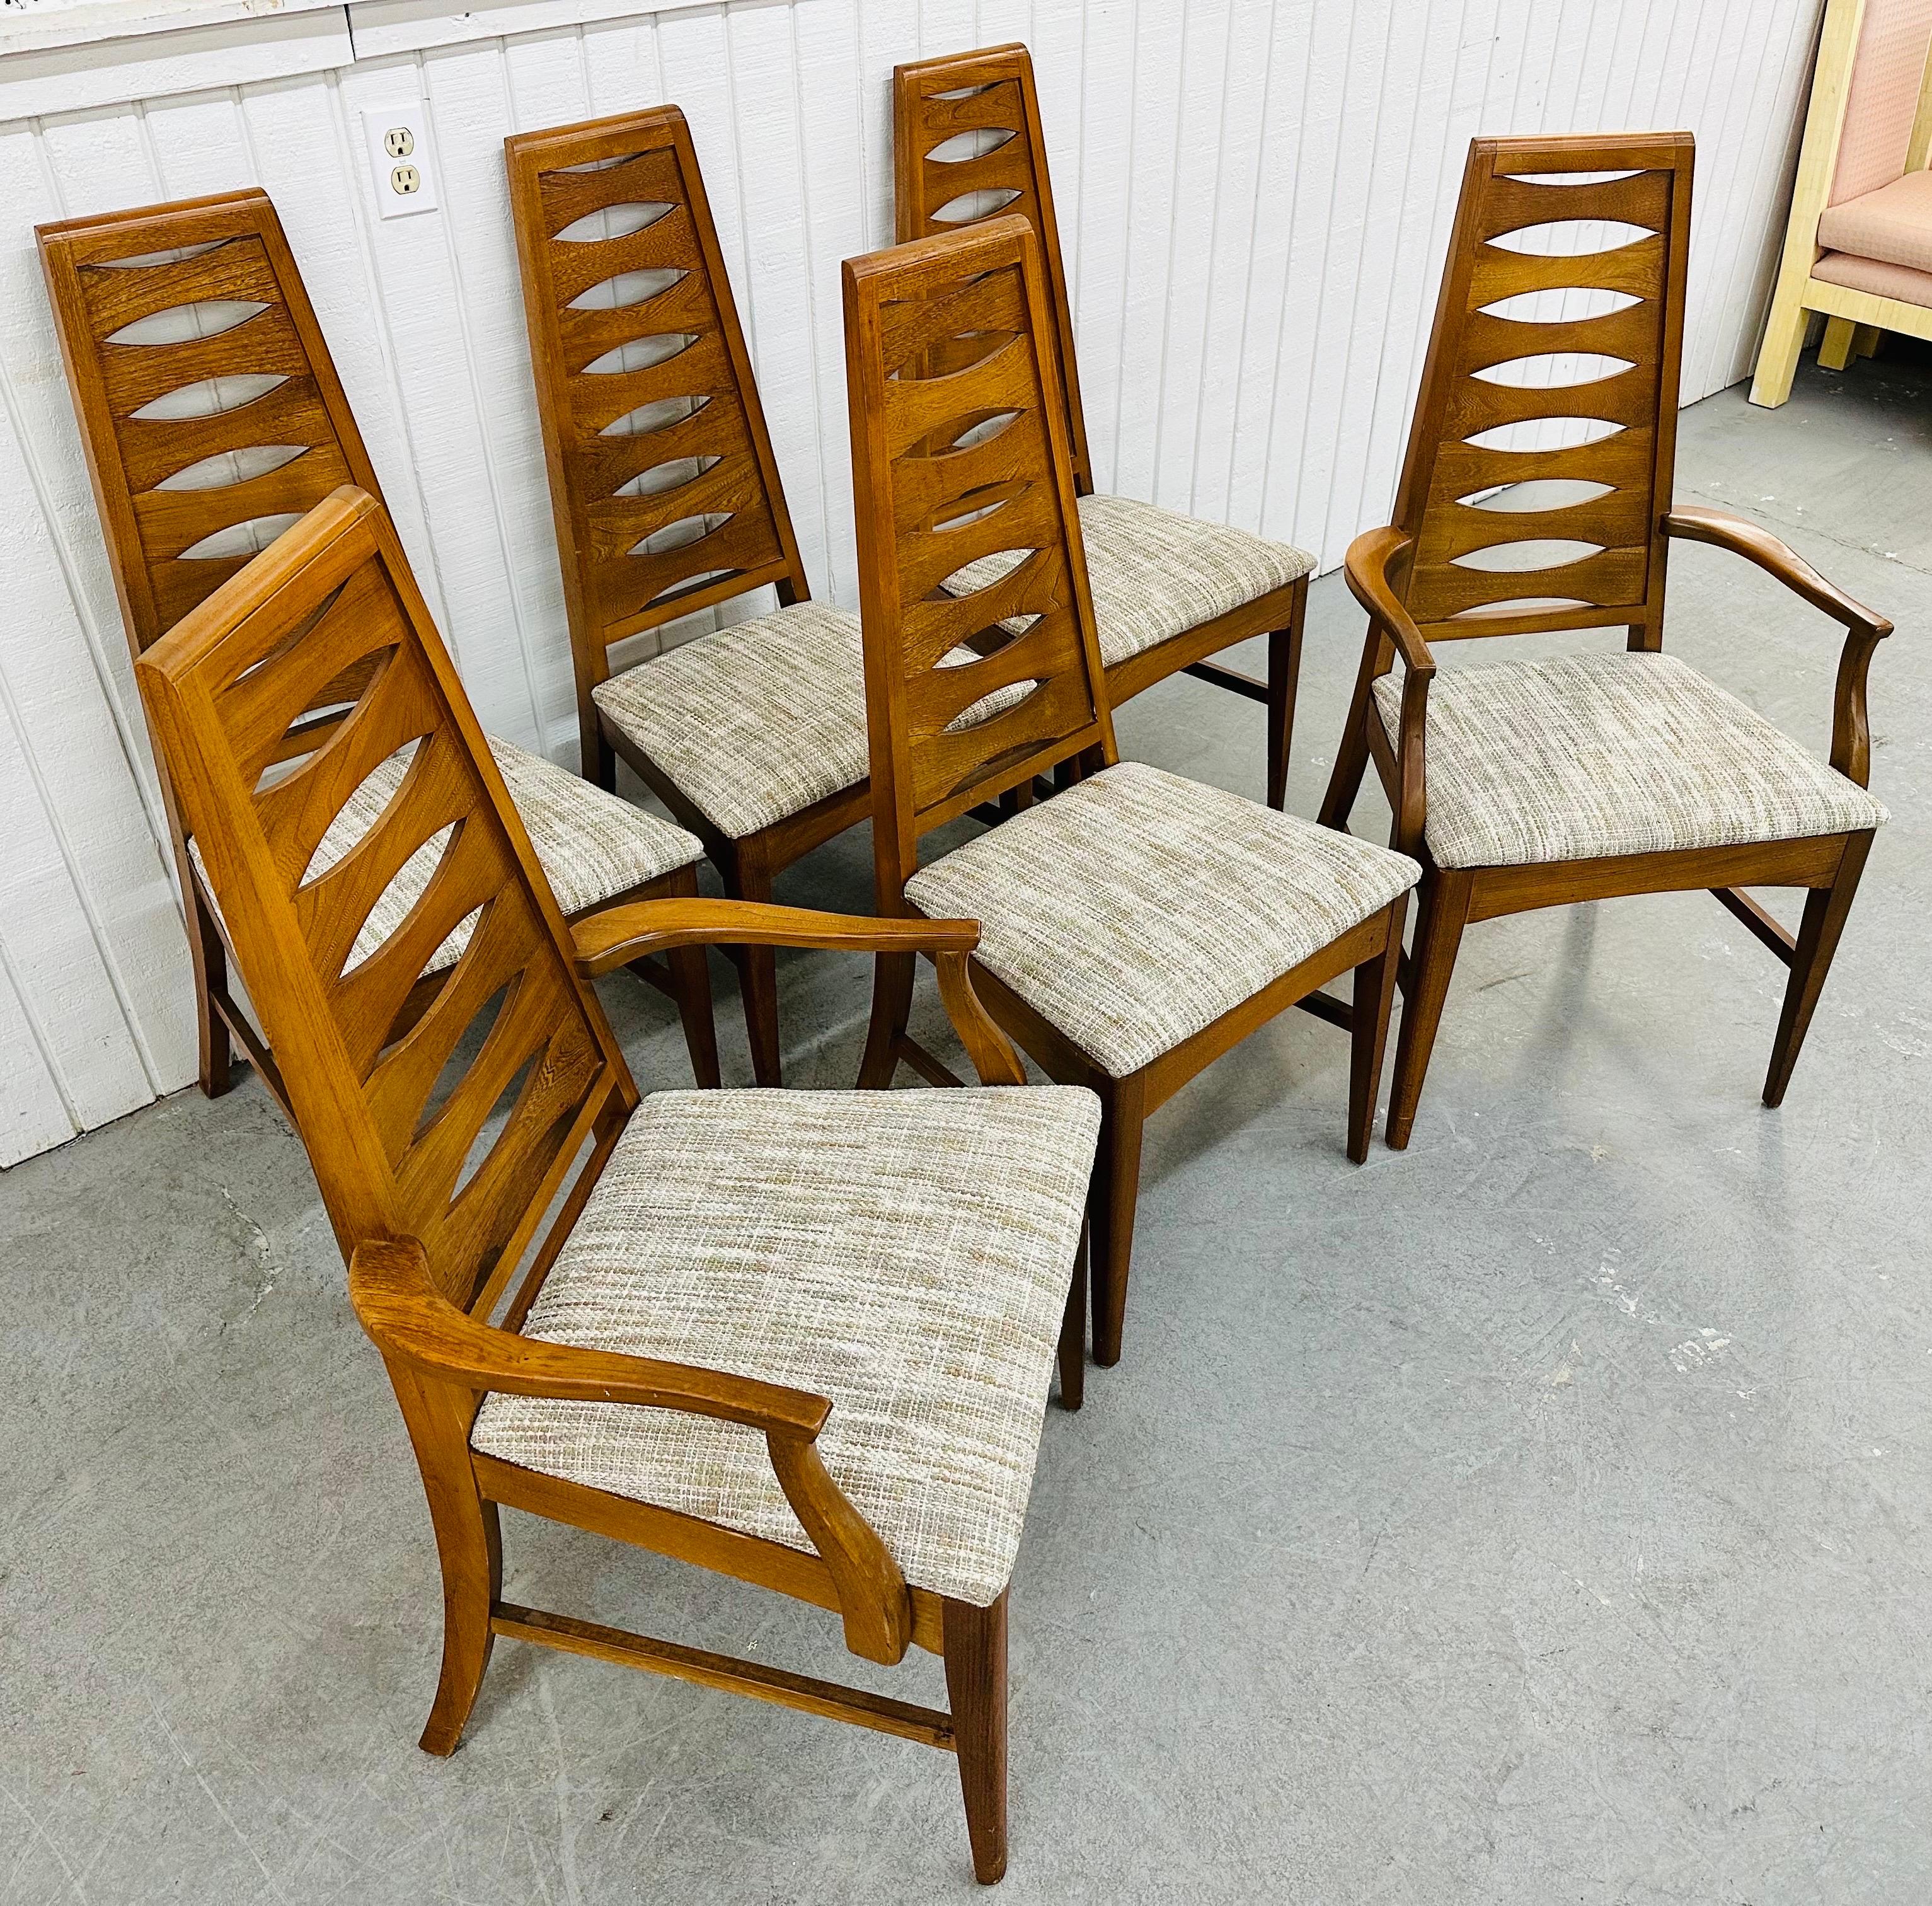 American Mid-Century Modern Young Manufacturing Walnut Catseye Dining Chairs - Set of 6 For Sale